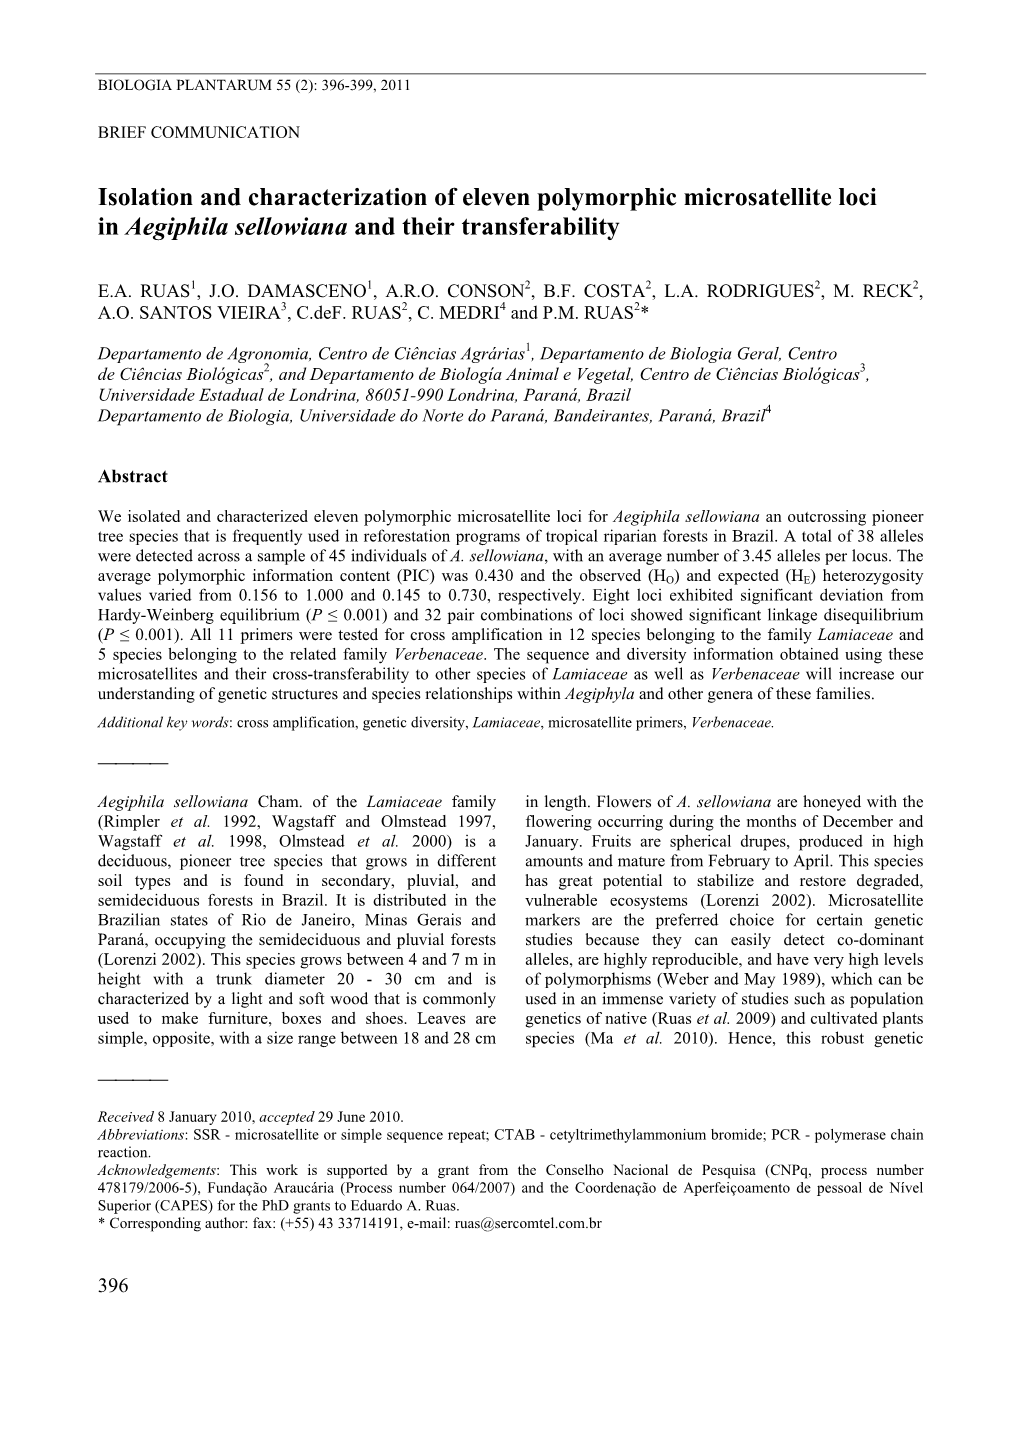 Isolation and Characterization of Eleven Polymorphic Microsatellite Loci in Aegiphila Sellowiana and Their Transferability